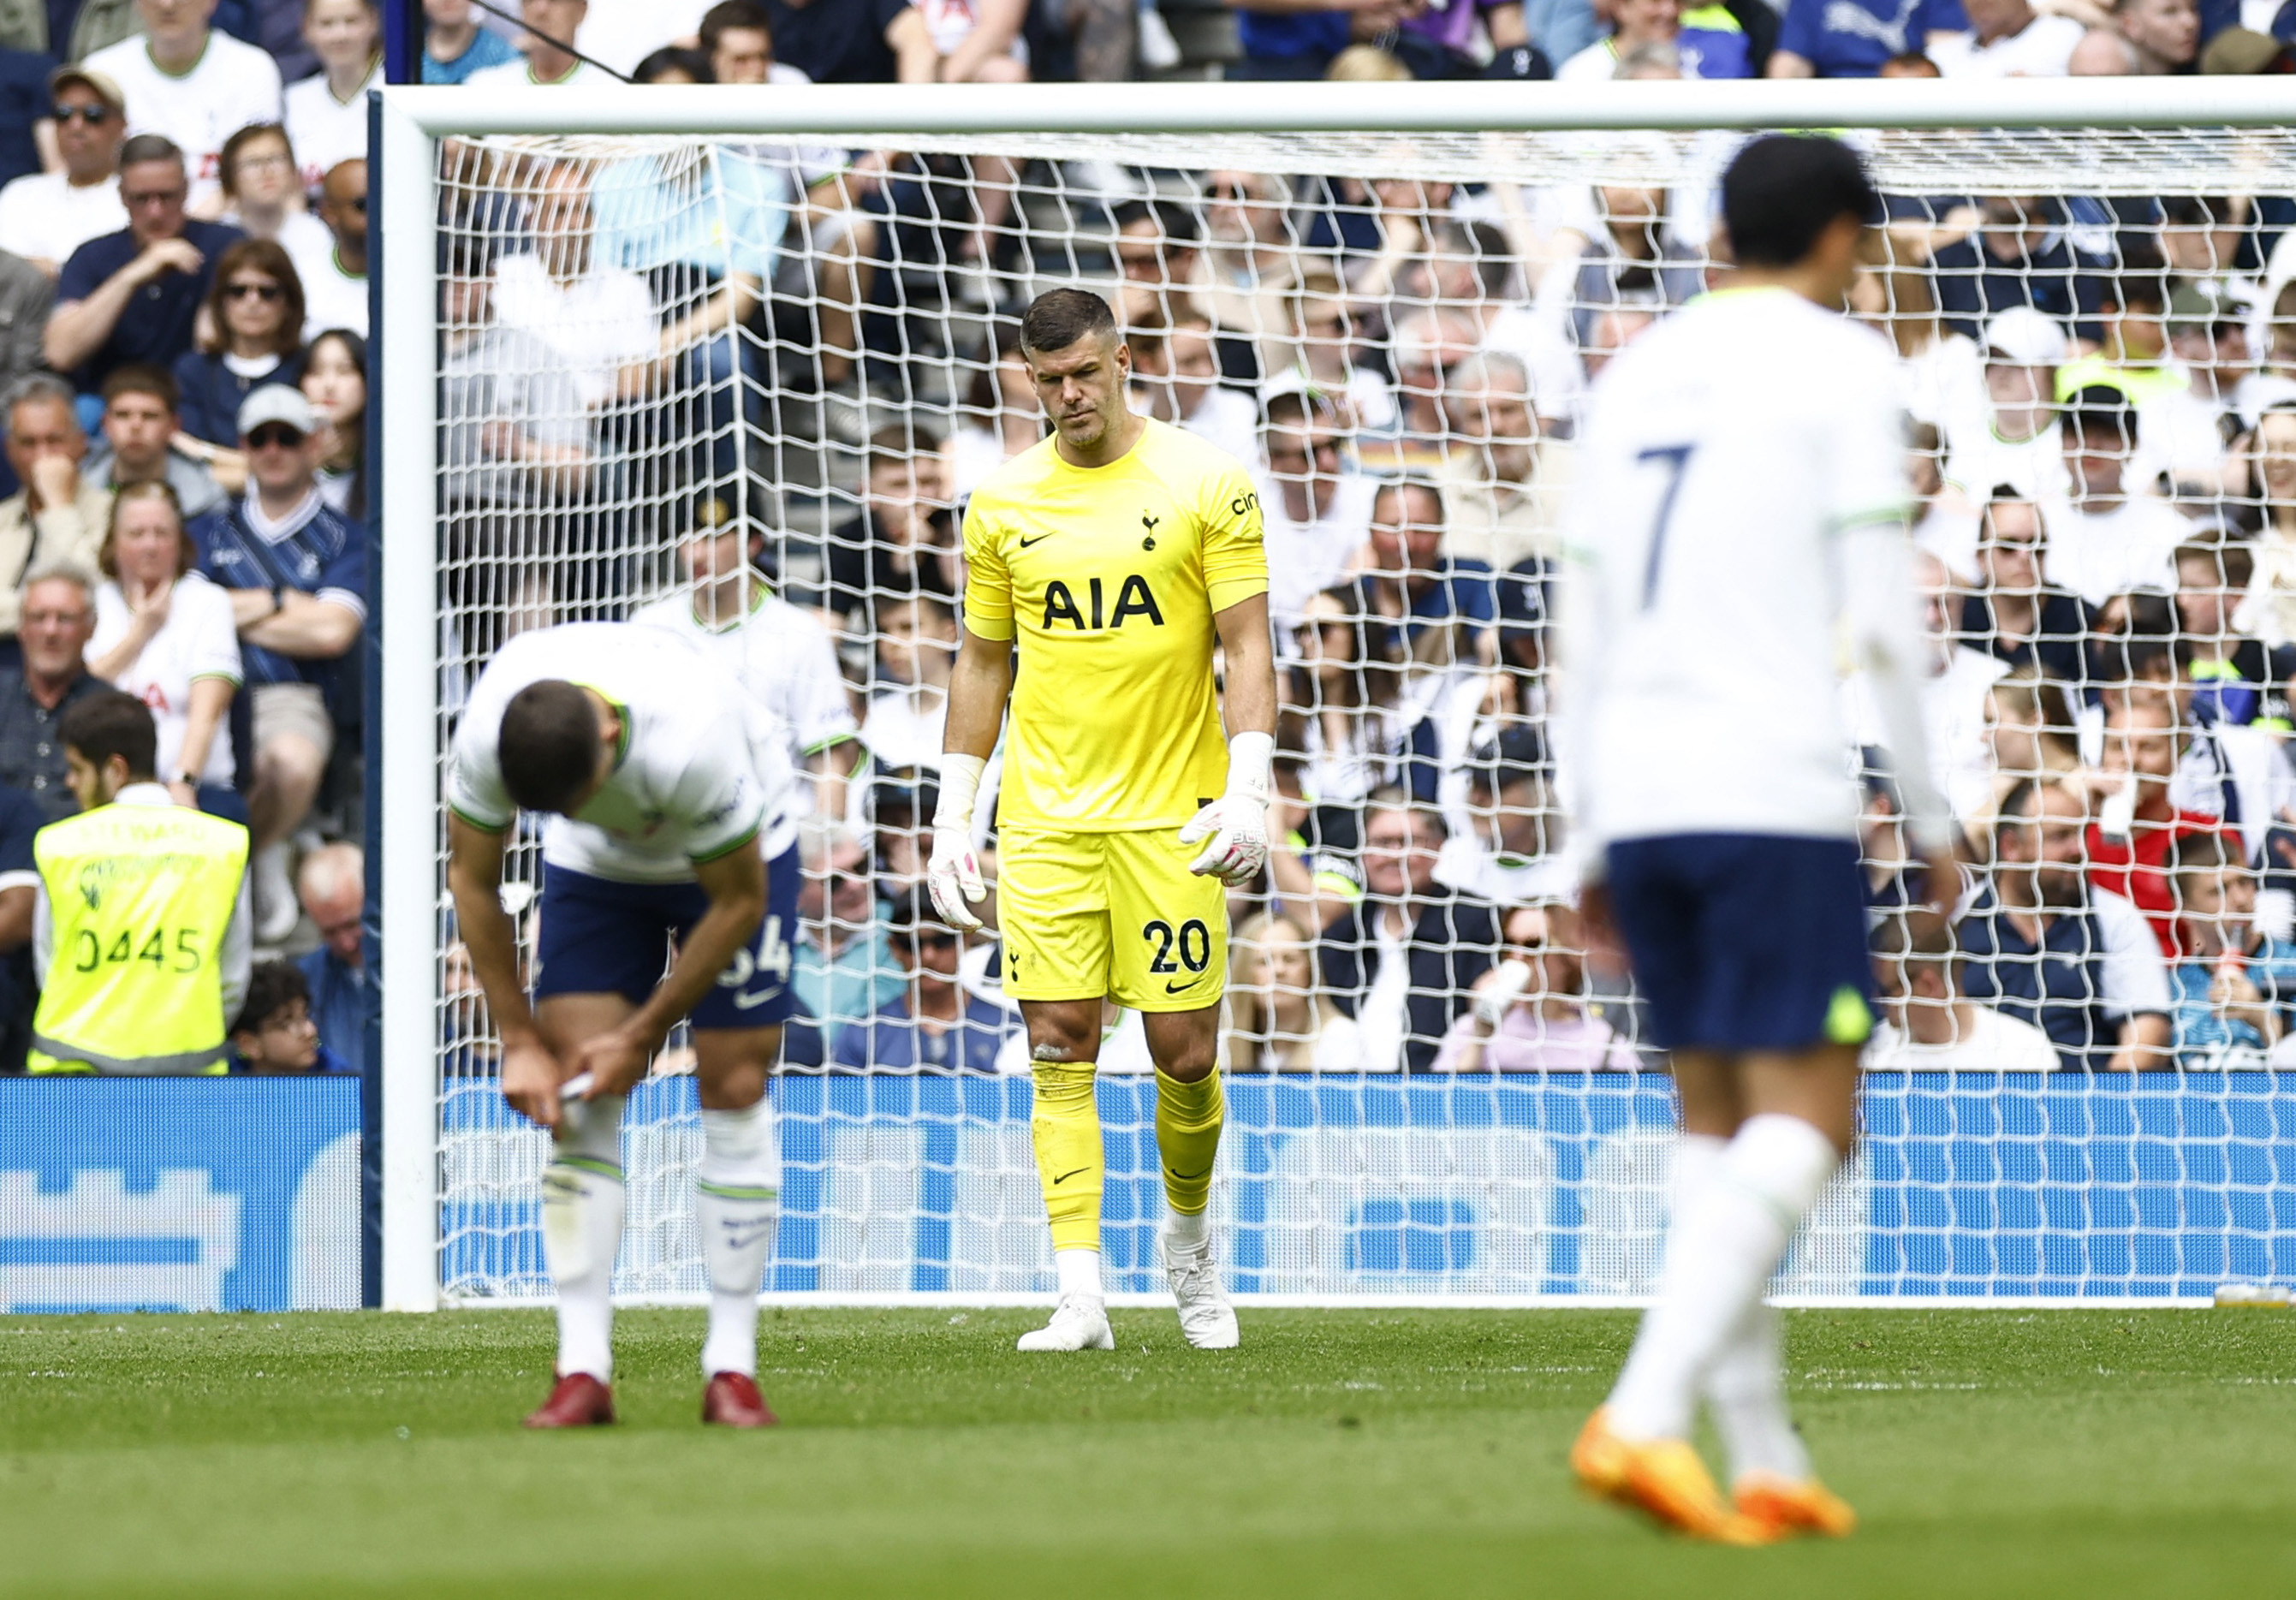 Tottenham maintain their dignity at end of troubling week to kick off new  era